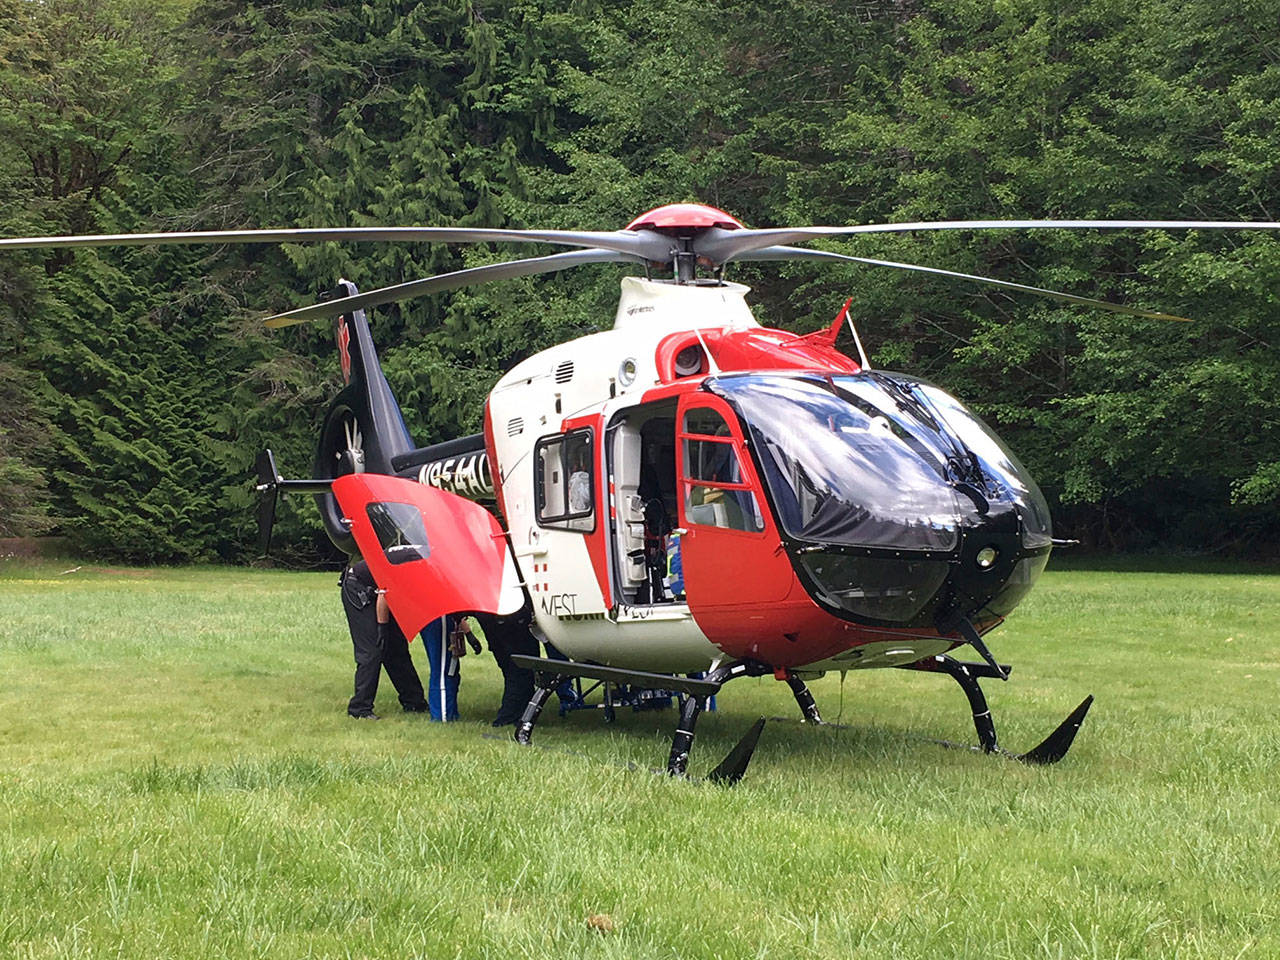 Emergency responders prepare to fly a man to Harborview Medical Center after a wreck on Forest Service Road 2918 on Sunday. (Mike DeRousie/Clallam County Fire District No. 2)